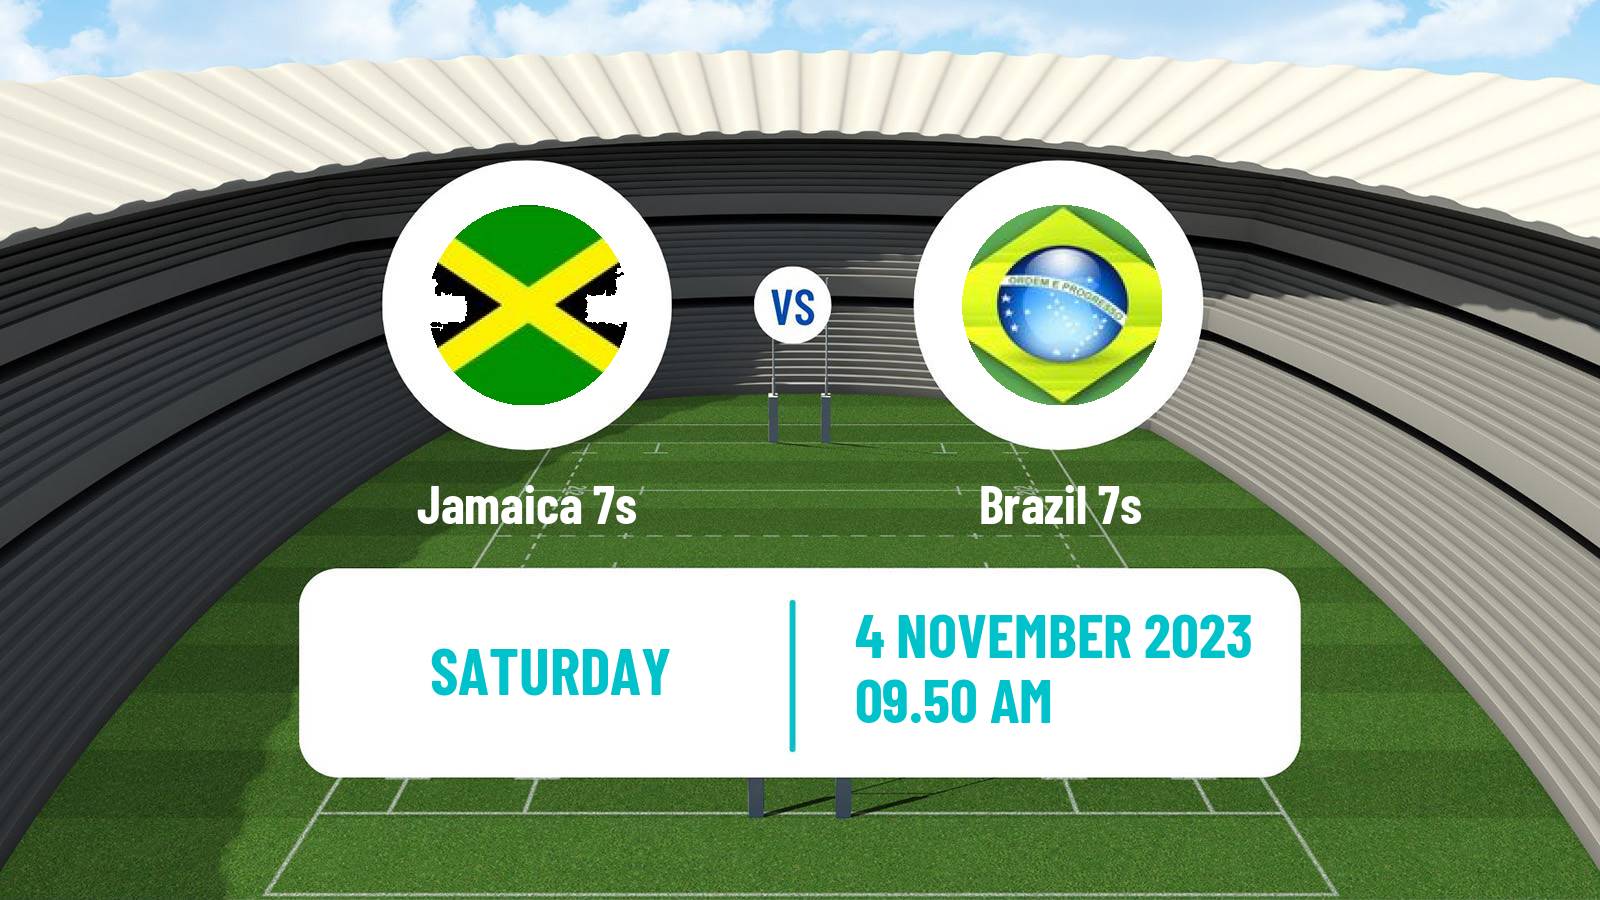 Rugby union Pan American 7s Rugby Jamaica 7s - Brazil 7s